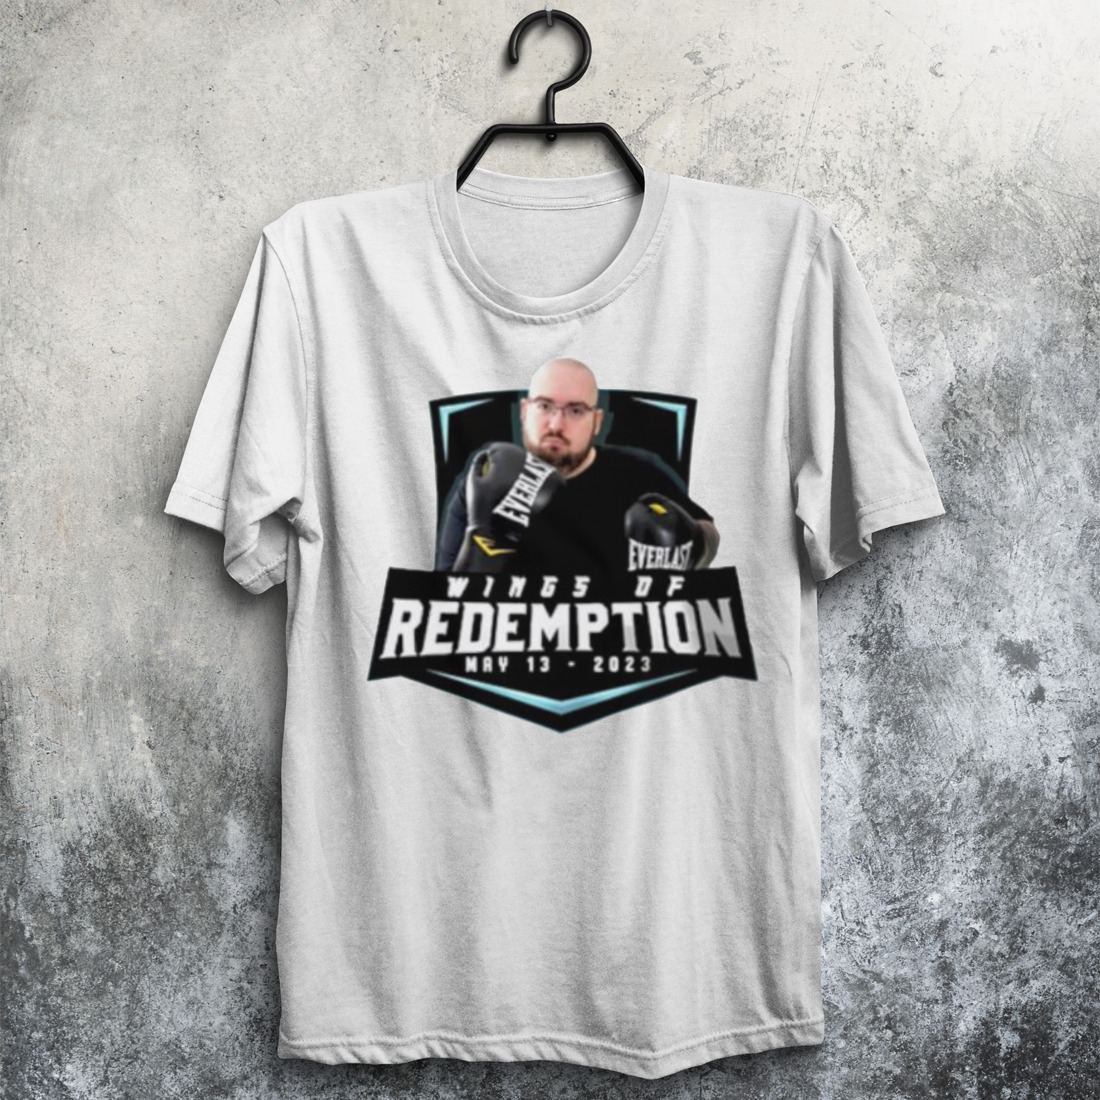 Wings of redemption fight May 13 2023 shirt